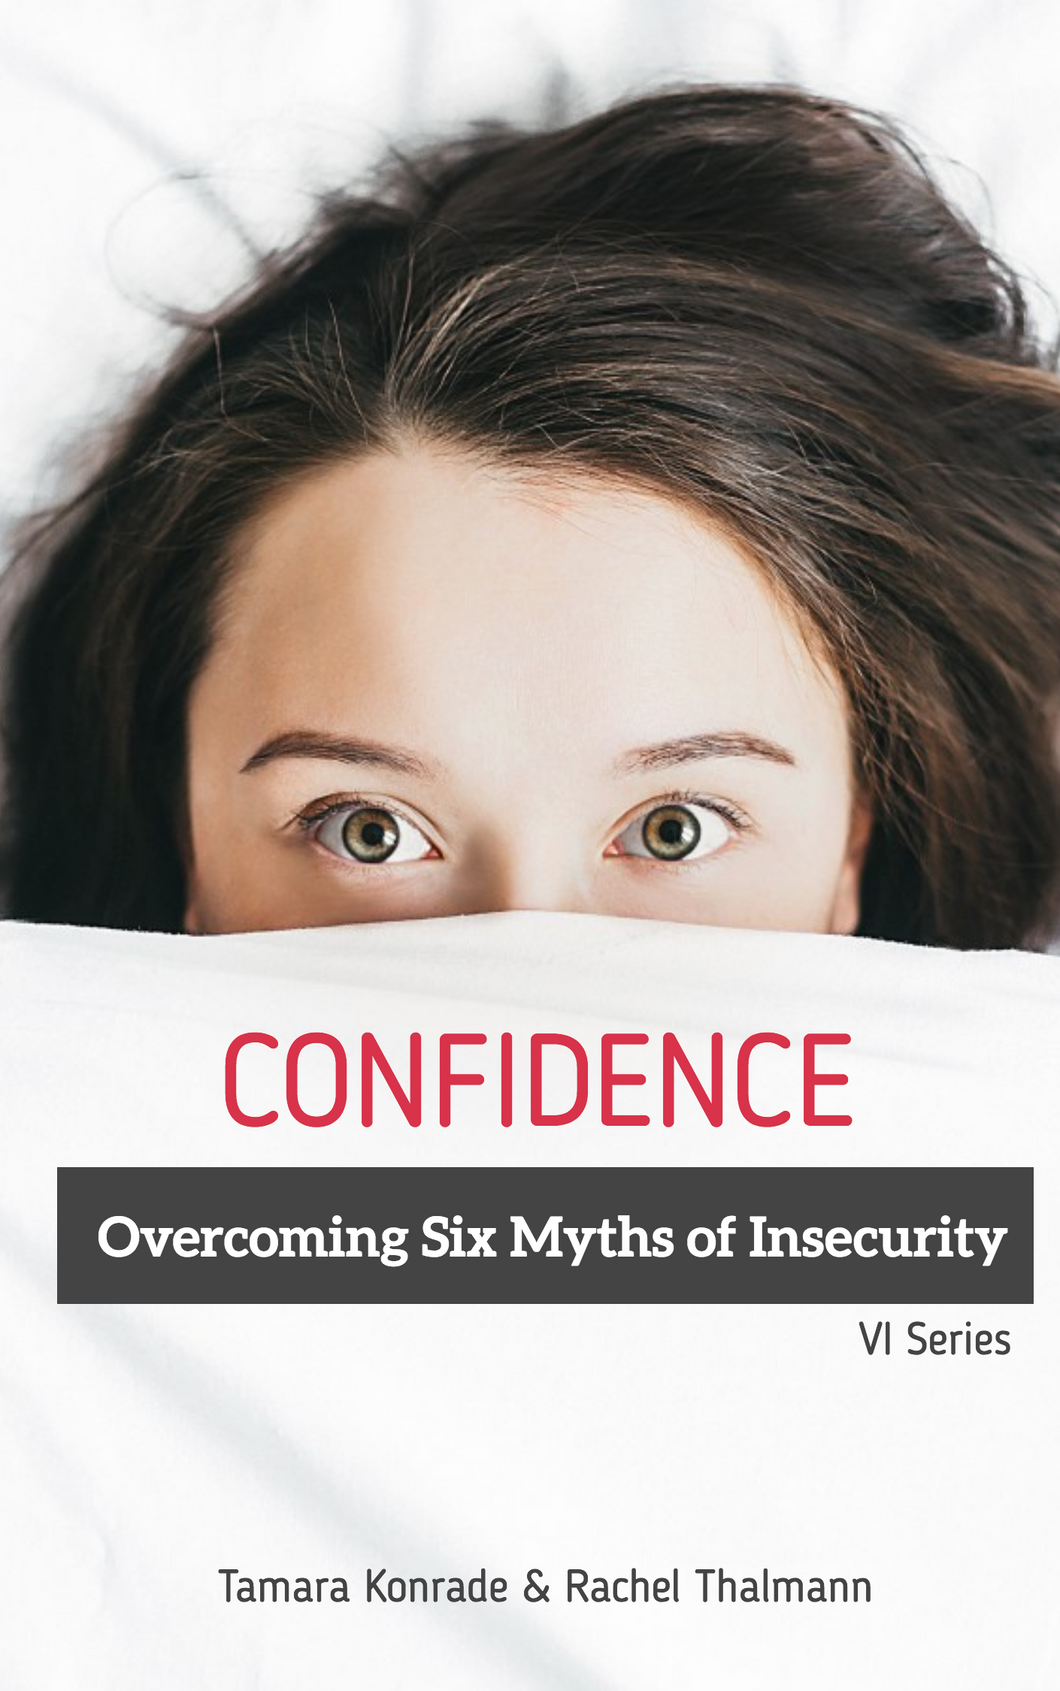 Confidence: Overcoming Six Myths of Insecurity